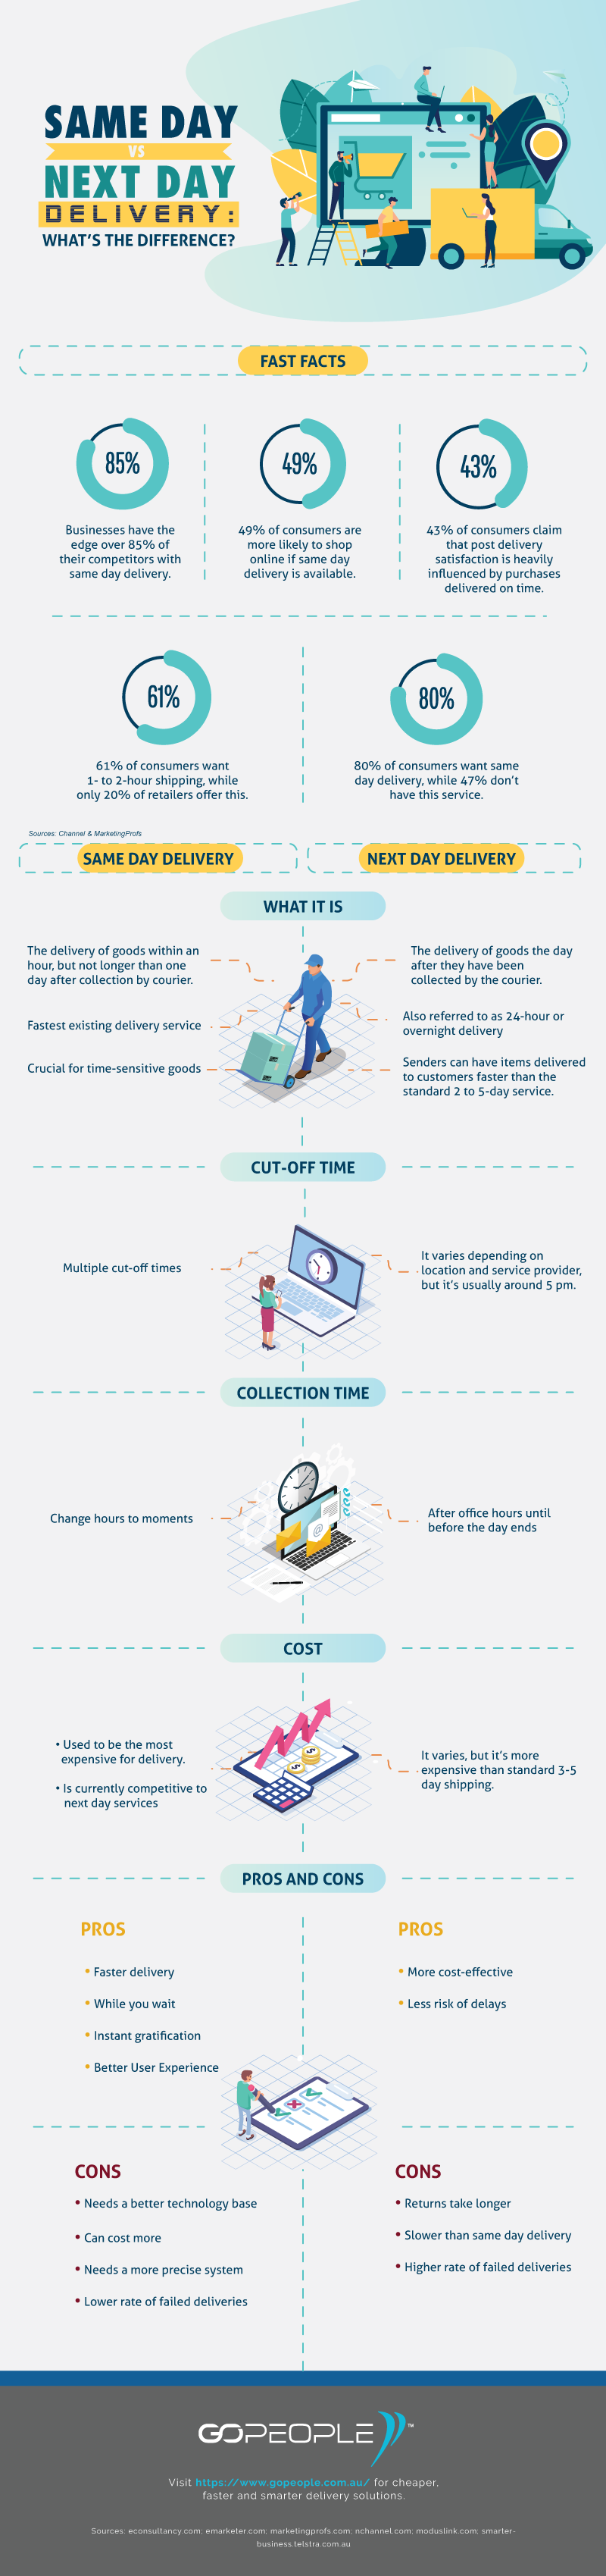 Satisfying the Consumers Demand for ‘Now’ Delivery: Principles of Same Day Vs Next Day Delivery - Infographic